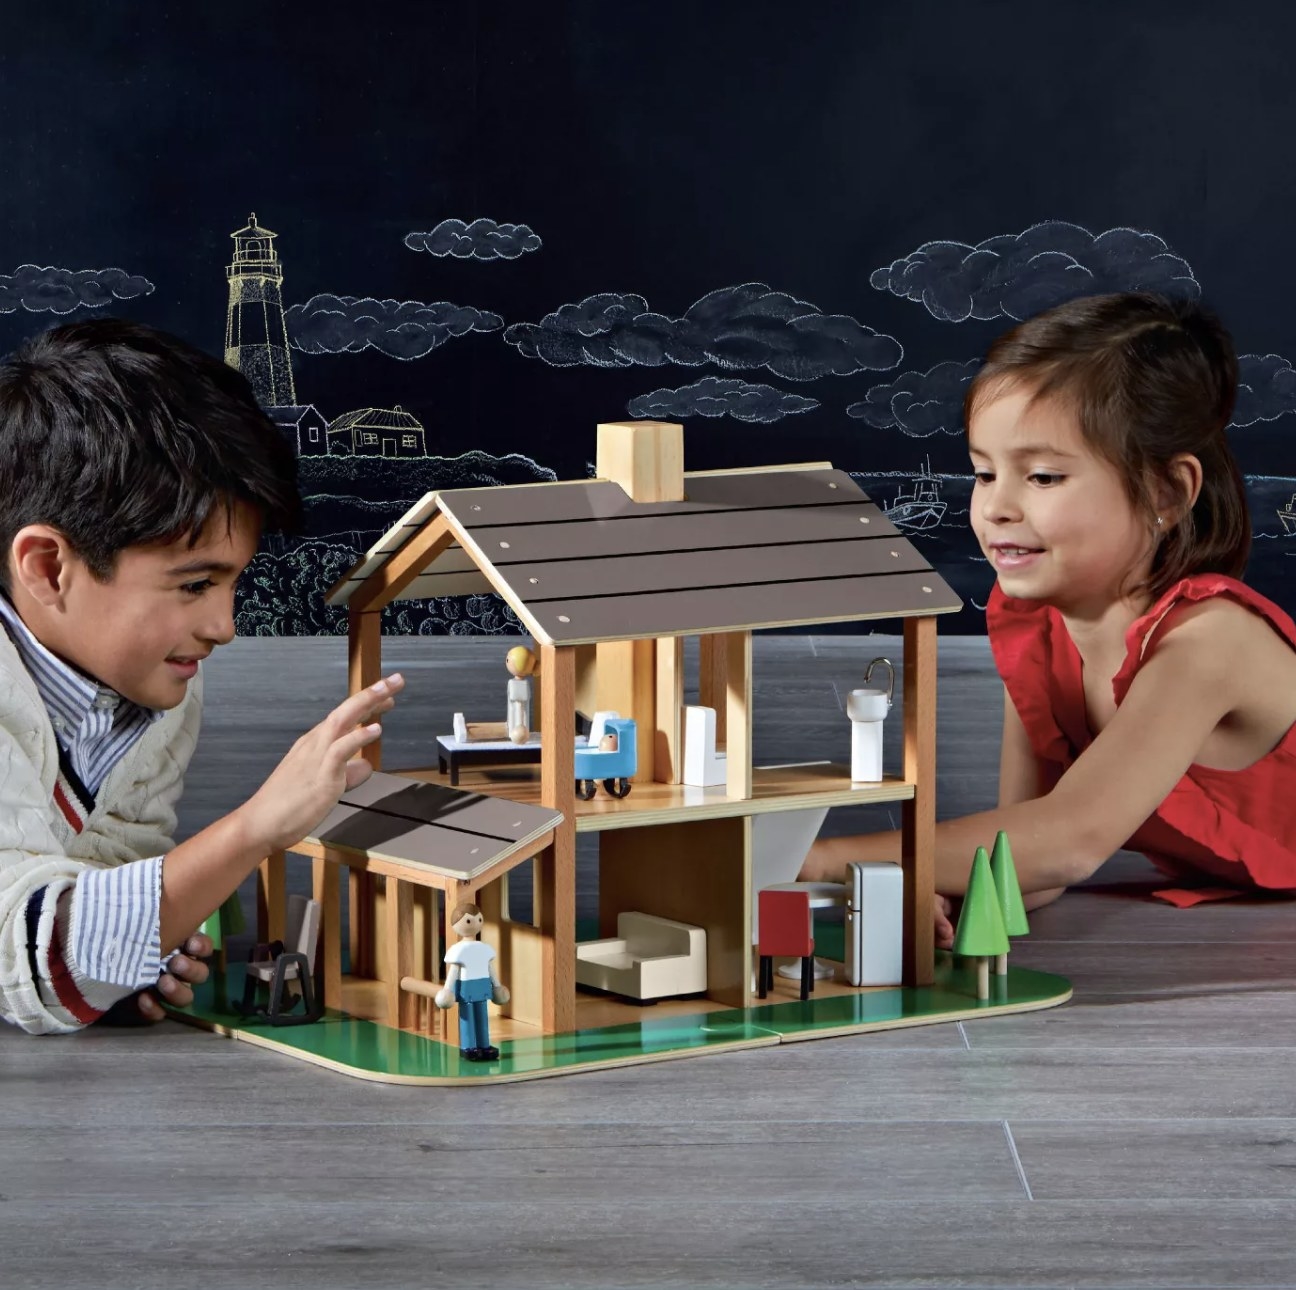 Two people playing with a wooden dollhouse